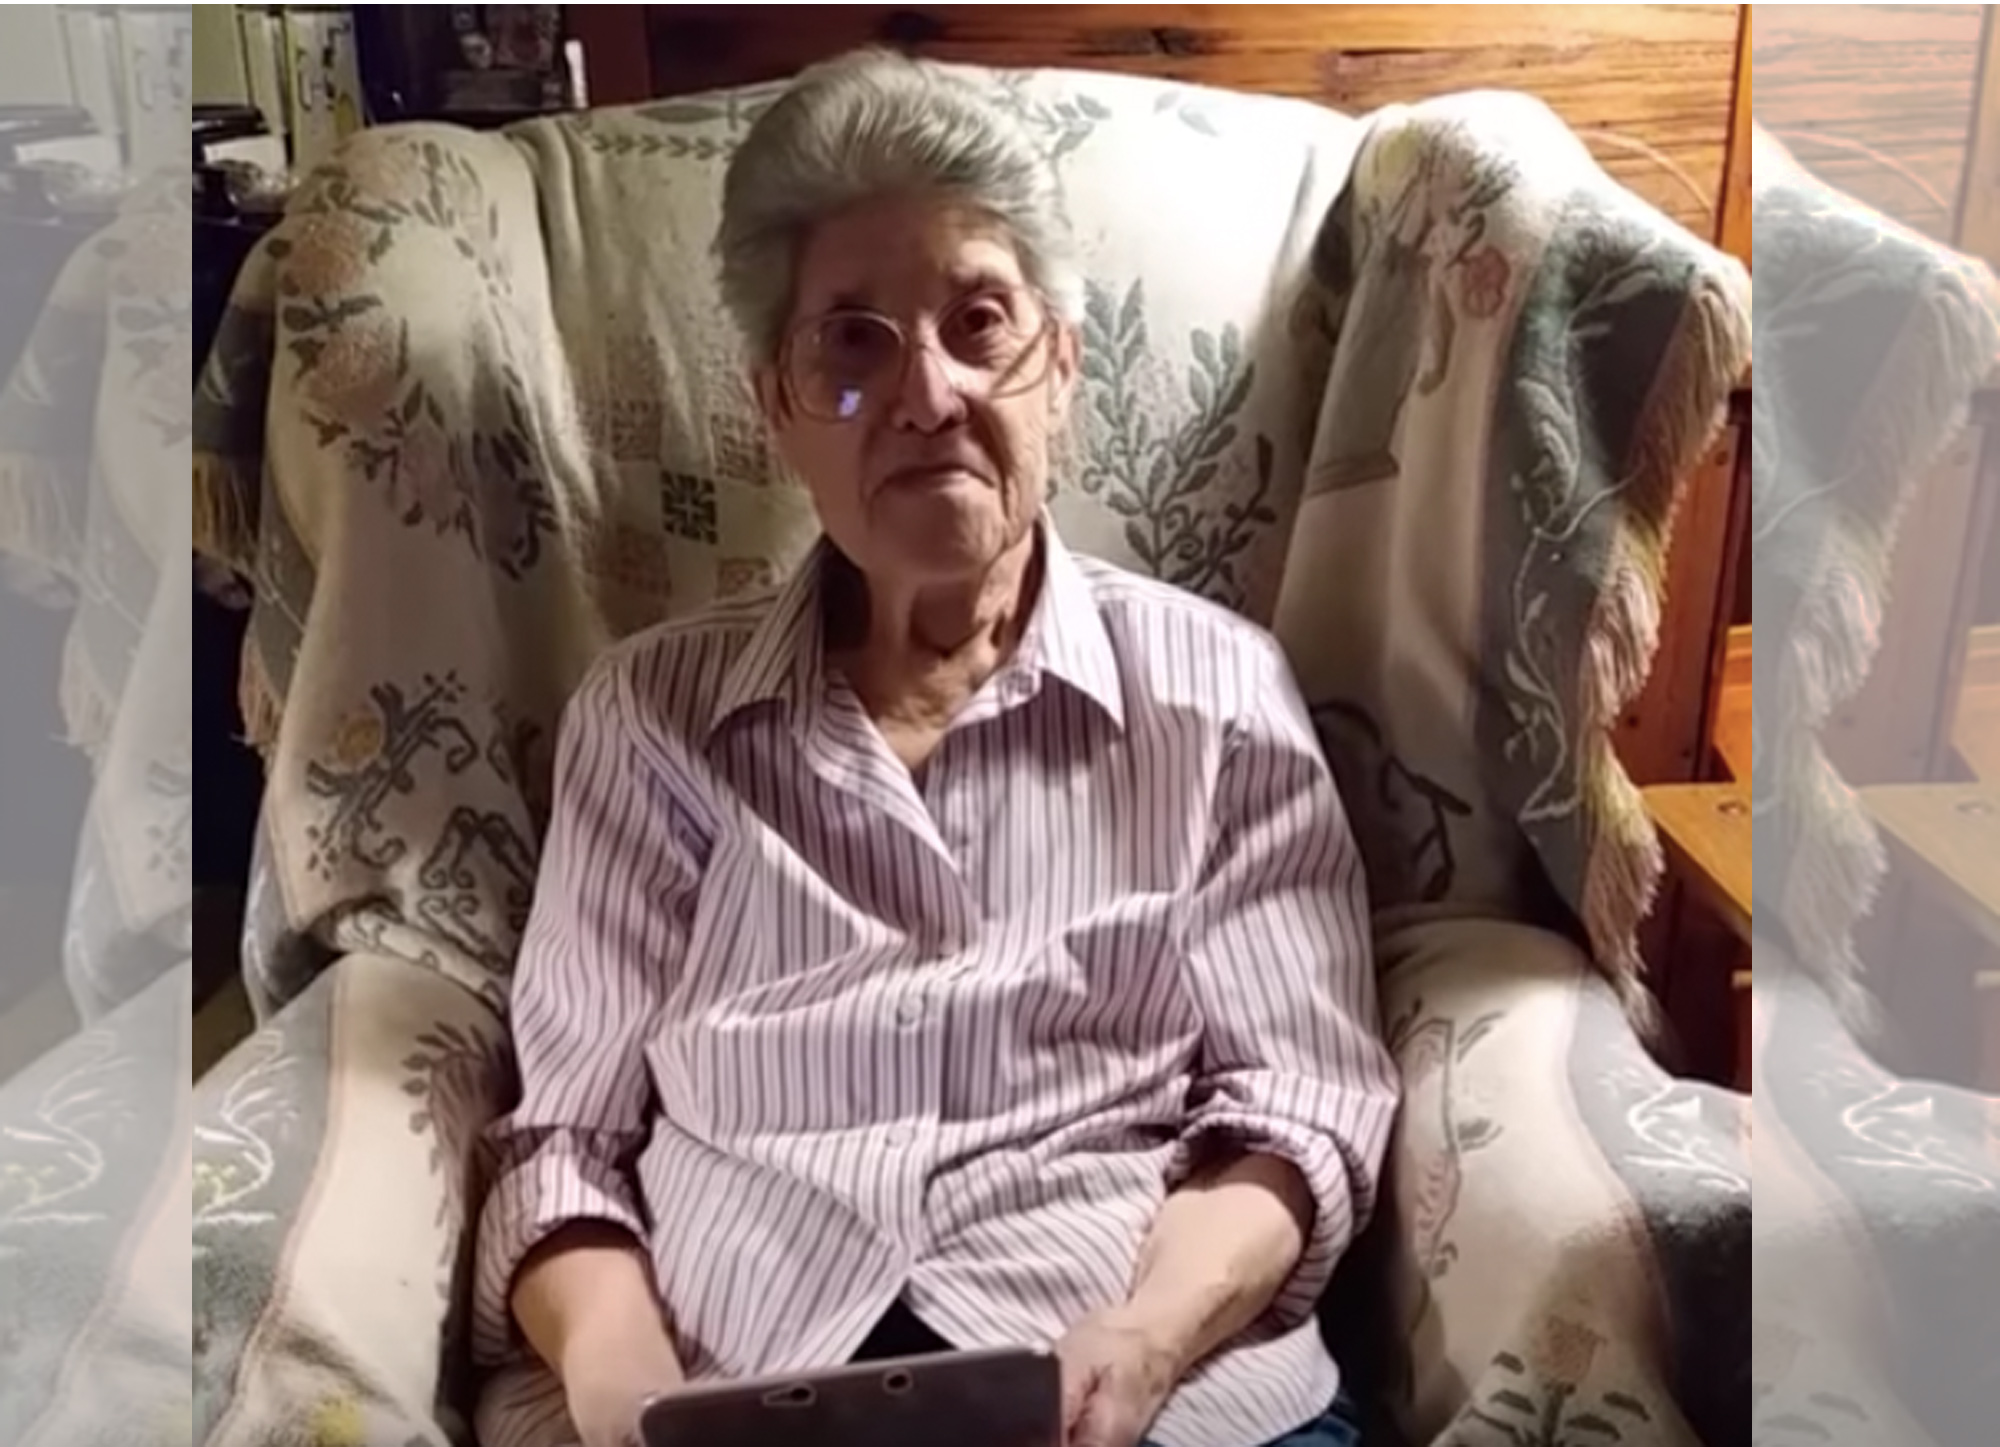 Watch This 87-Year-Old Grandma on a Walkthrough of Her 'Animal Crossing’ Town